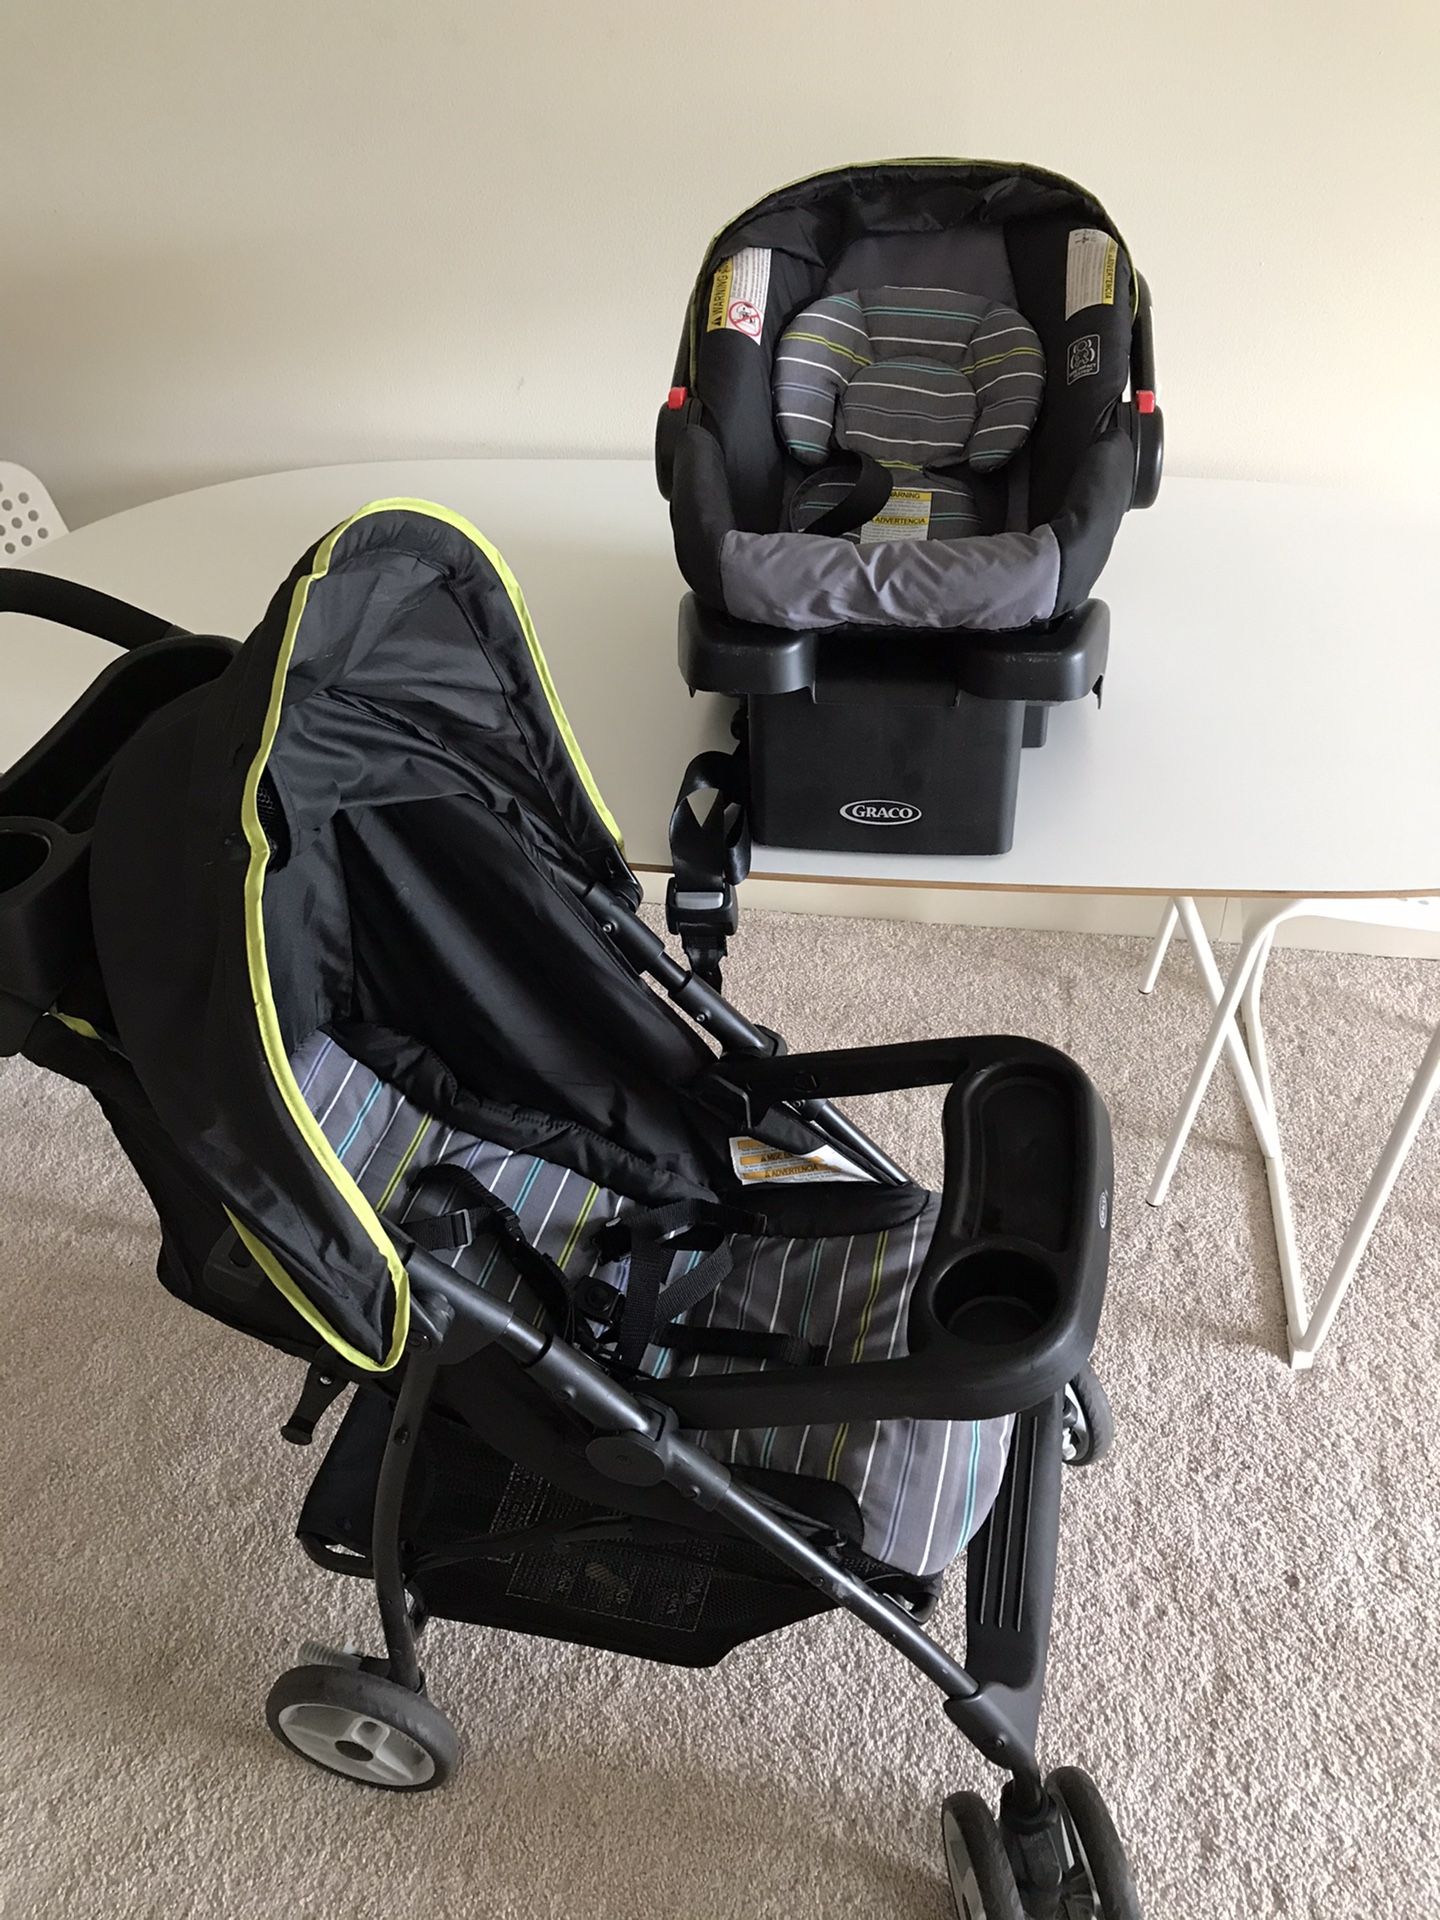 Stroller with infant car seat